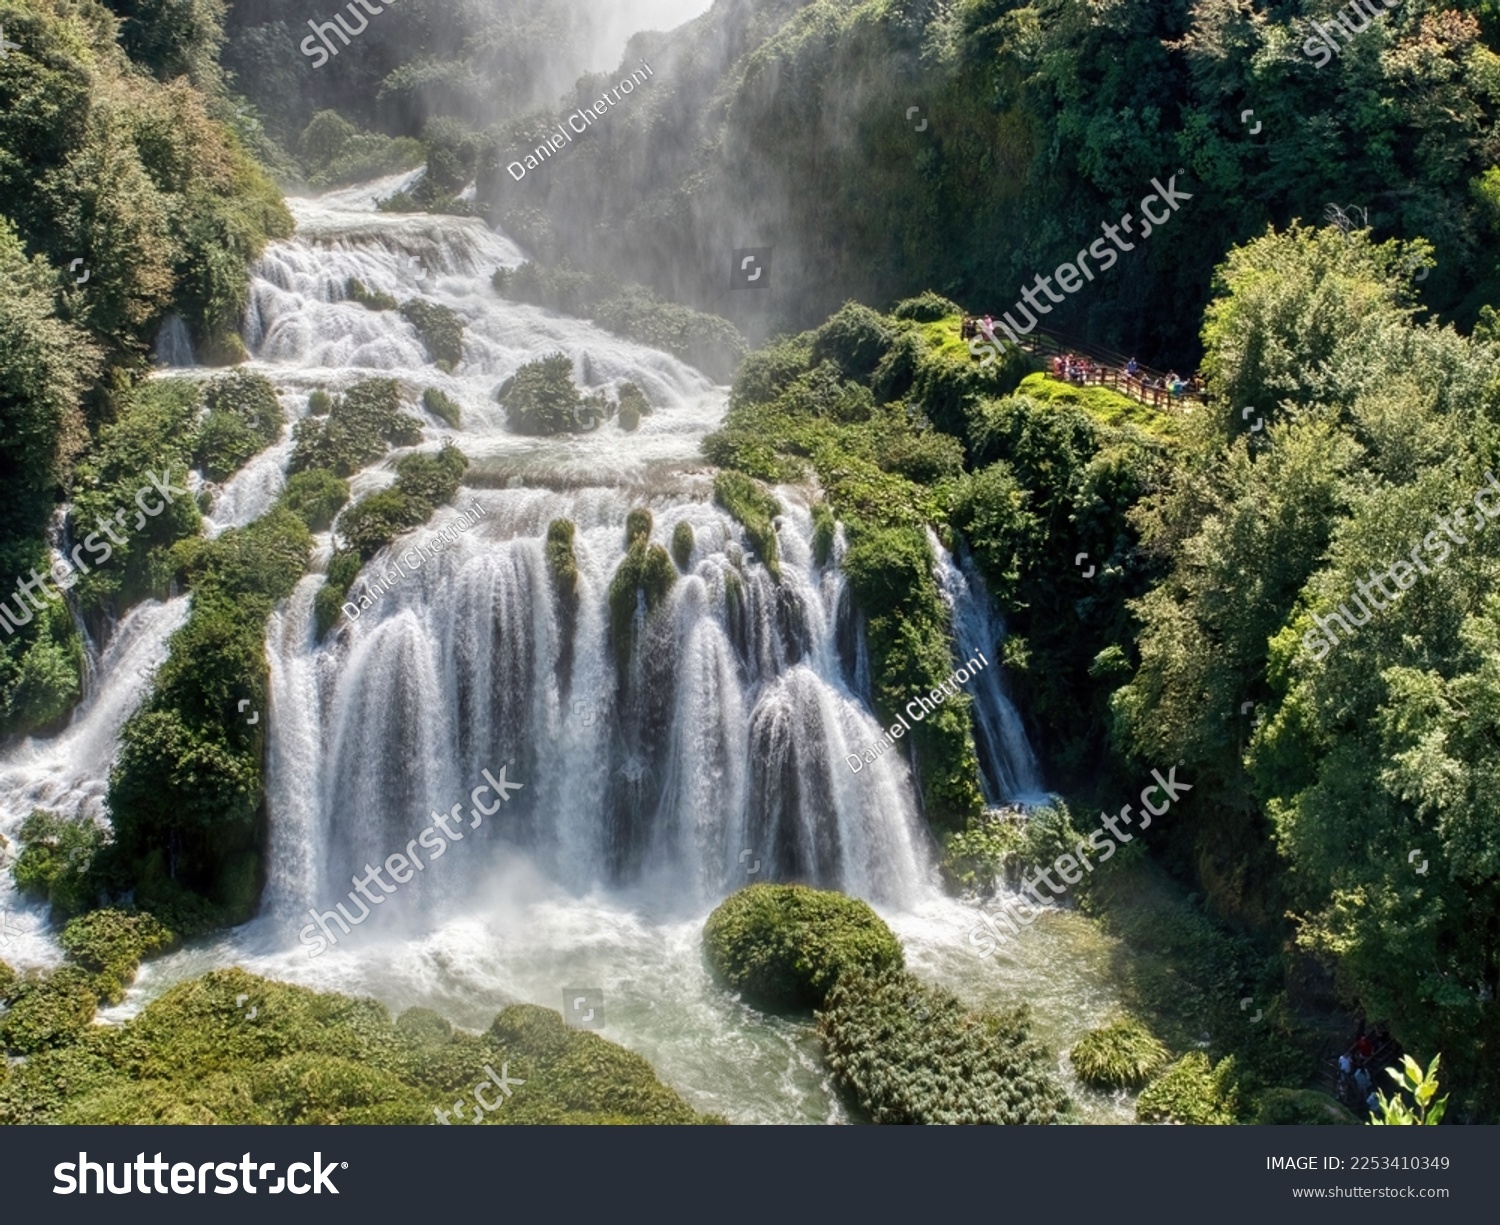 Cascata delle Marmore is a waterfall created by the romans situated near Terni, Umbria, Italy #2253410349